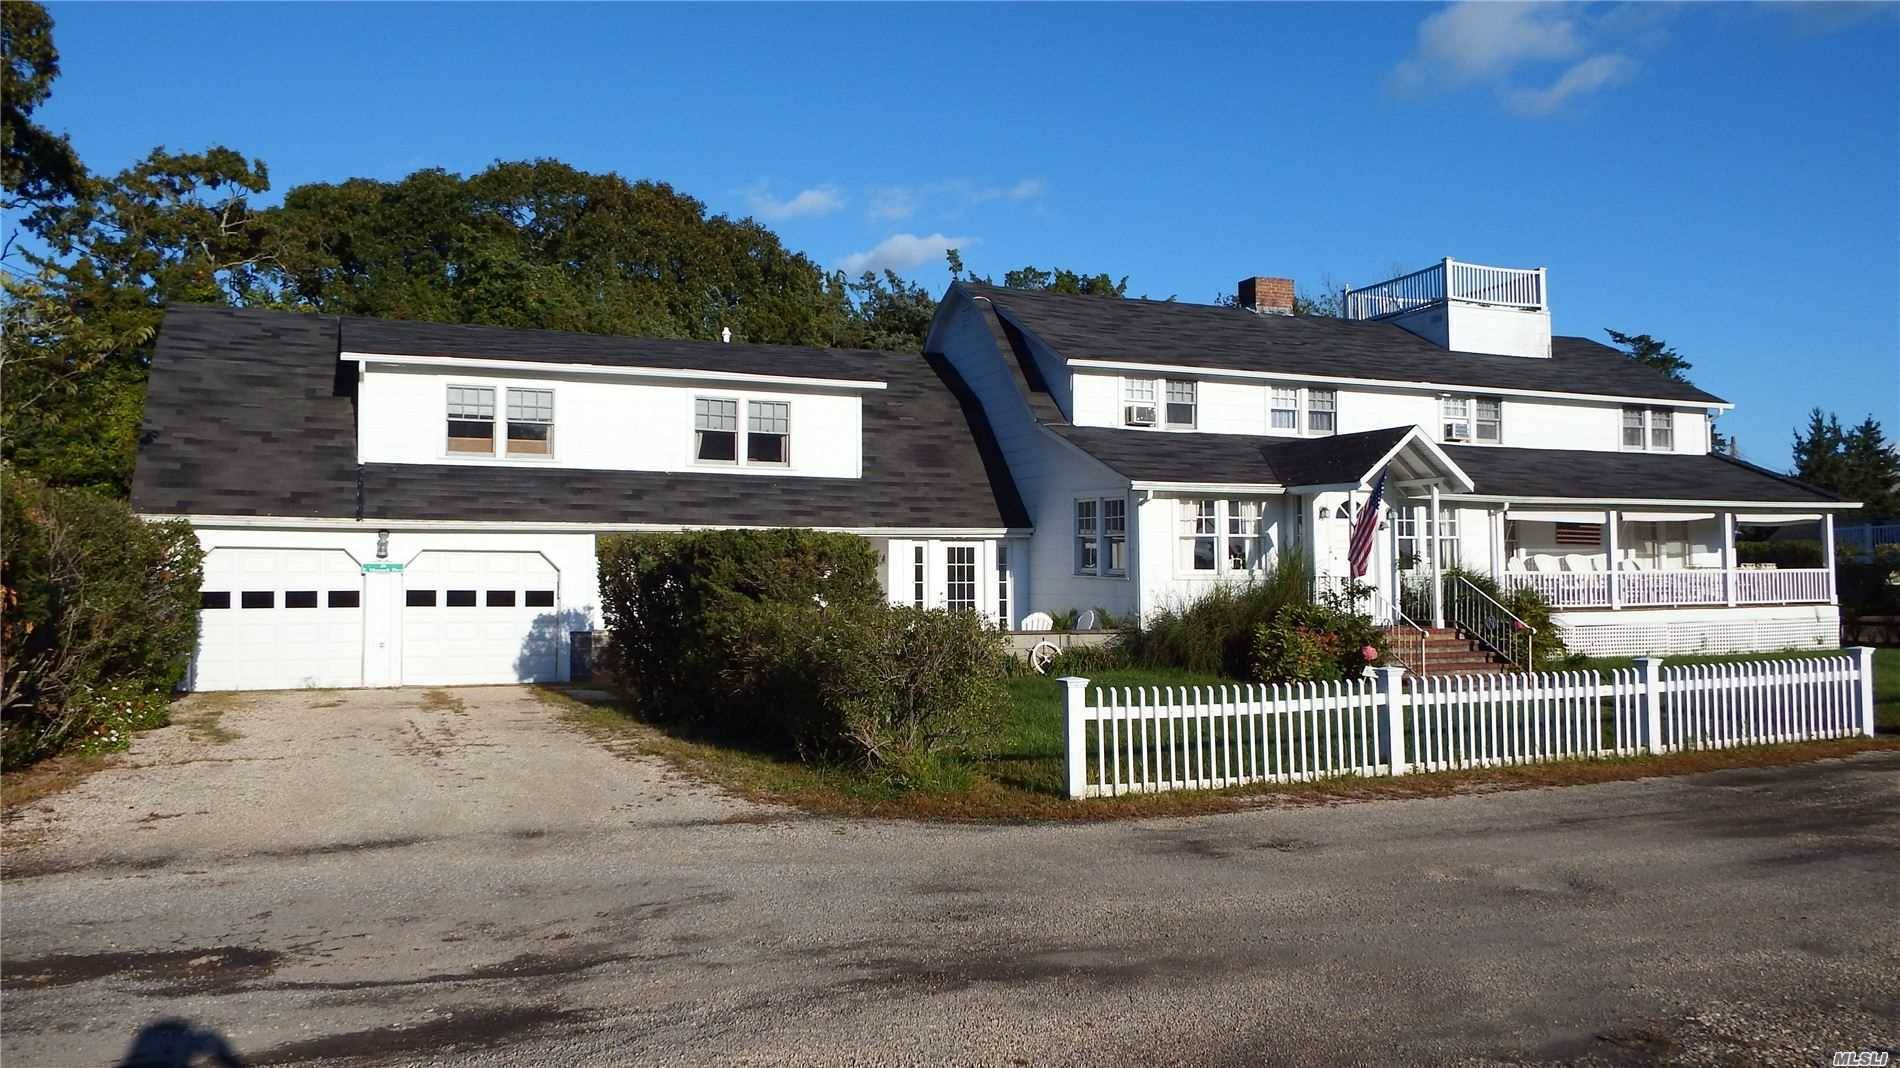 Classic 1936 Captains Cottage on the largest lot in a cozy beach community on Shinnecock Bay.